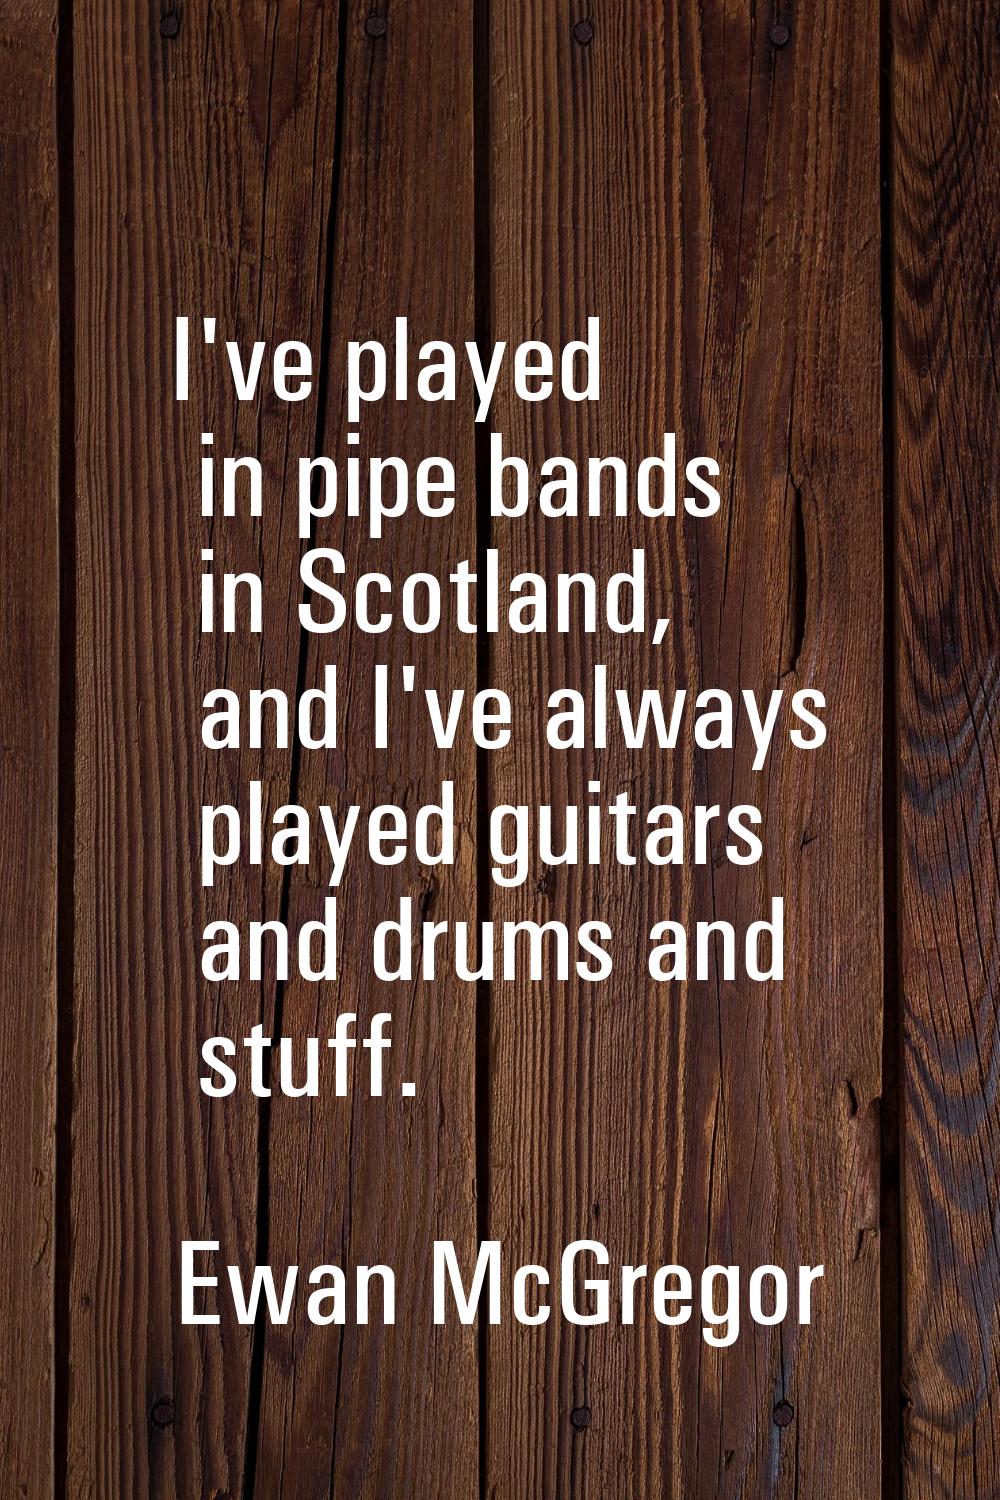 I've played in pipe bands in Scotland, and I've always played guitars and drums and stuff.